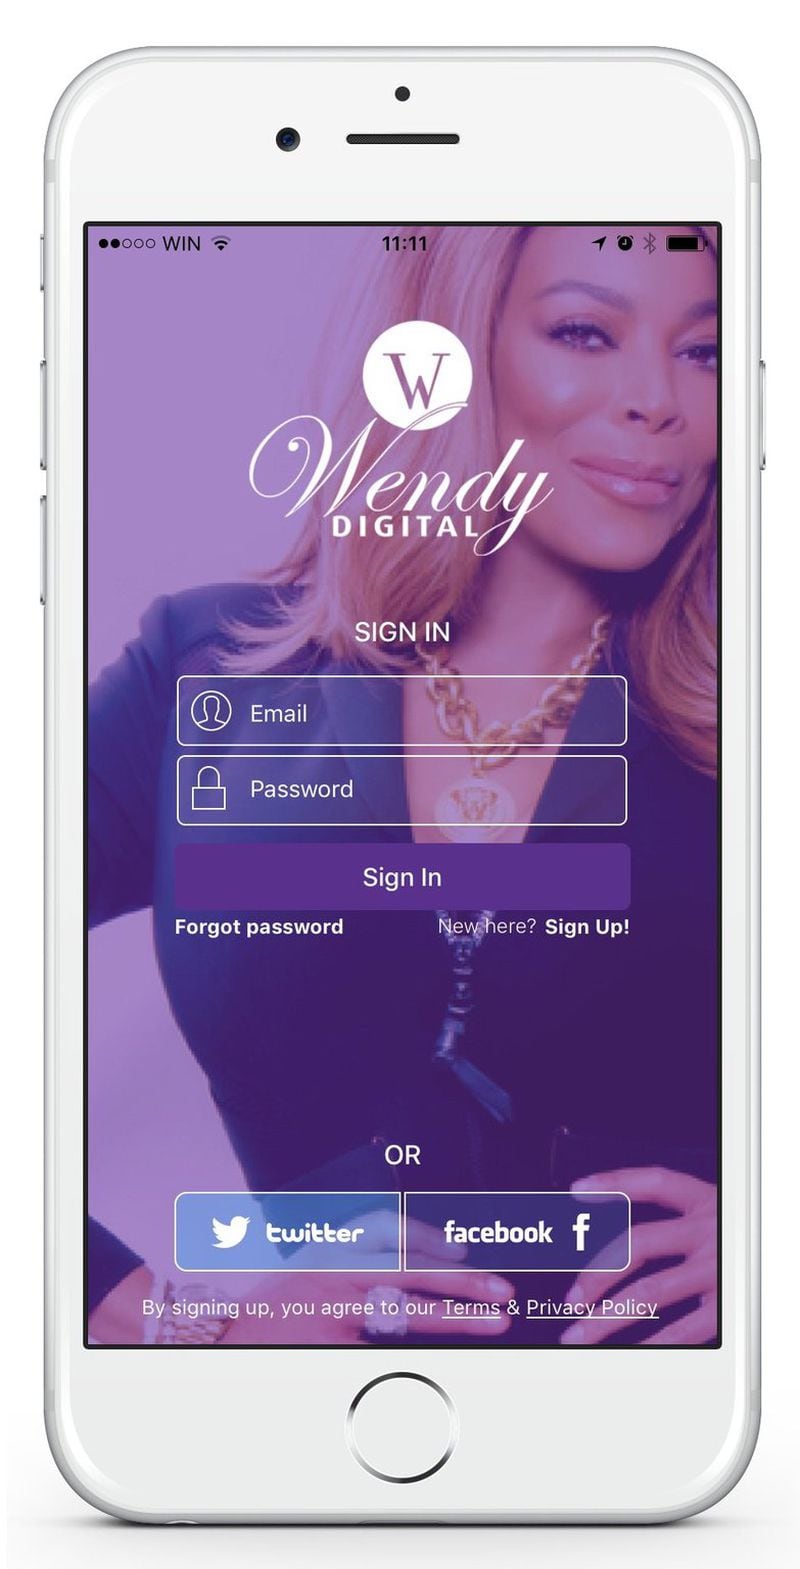 Wendy Williams’ new app, Wendy Williams Digital, brings her trademark personality and talk show features to your smartphone. CONTRIBUTED BY WENDY WILLIAMS DIGITAL